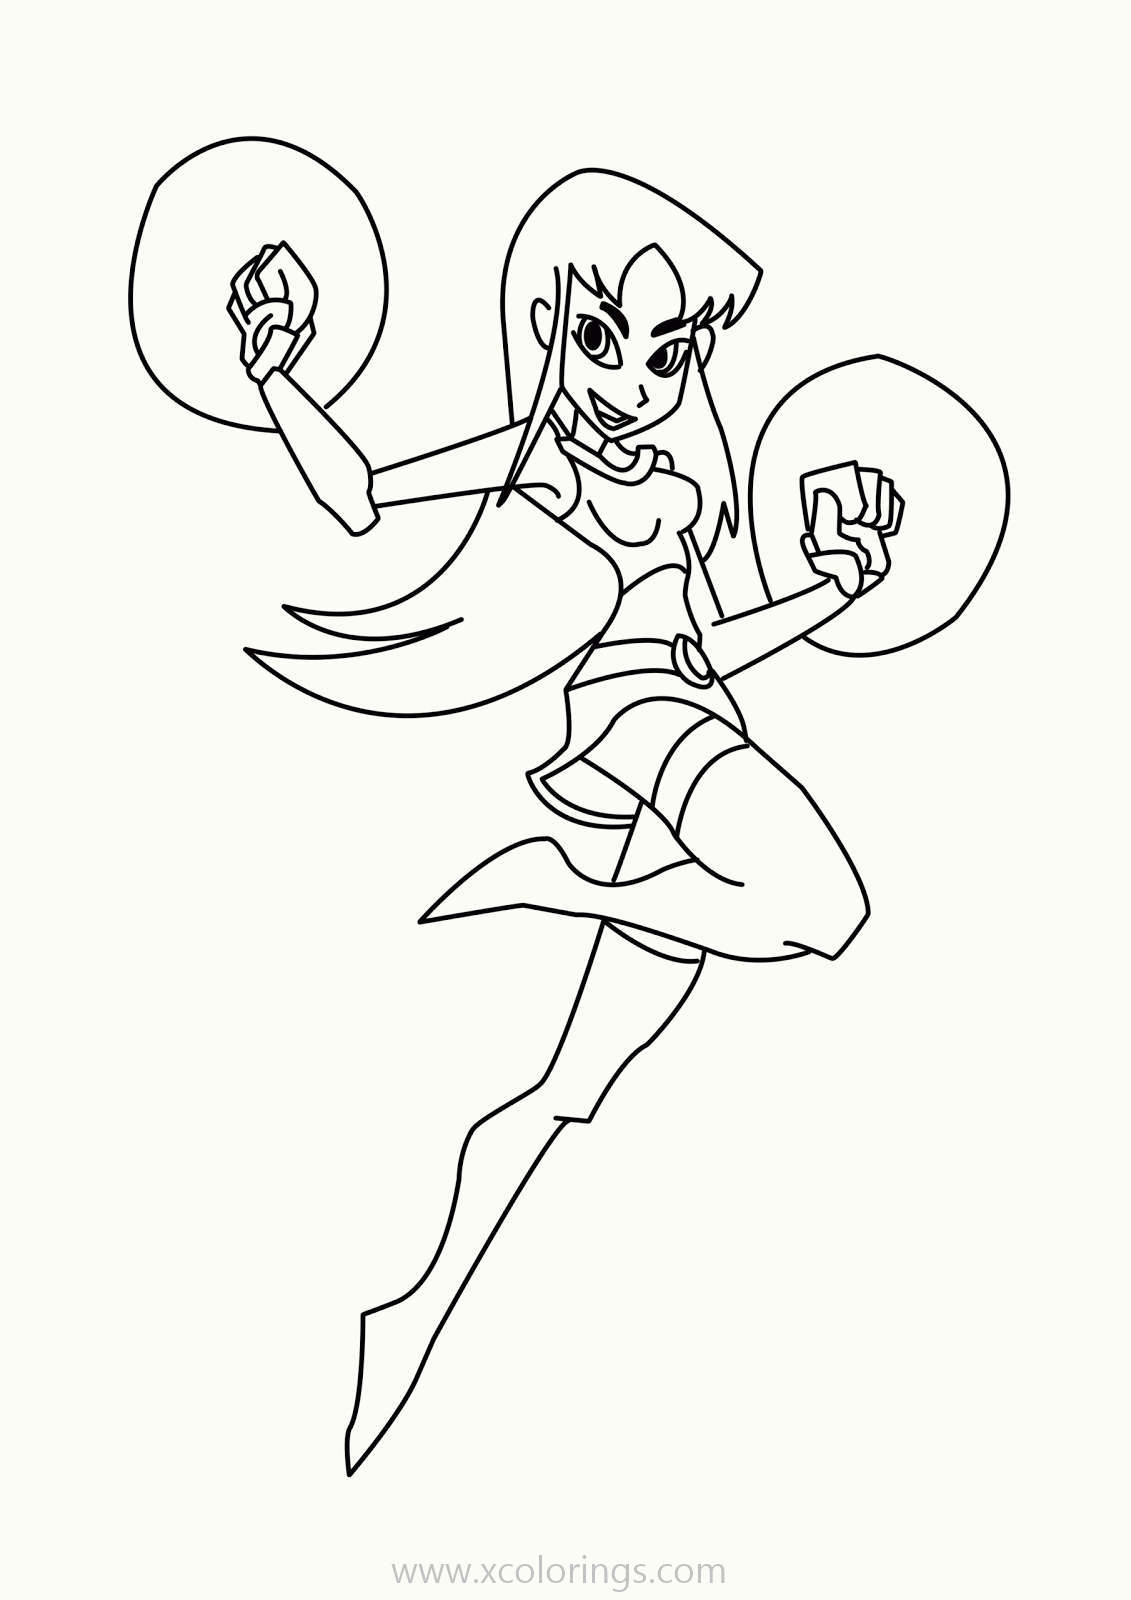 Free Teen Titans Go Coloring Pages Starfire with Power printable